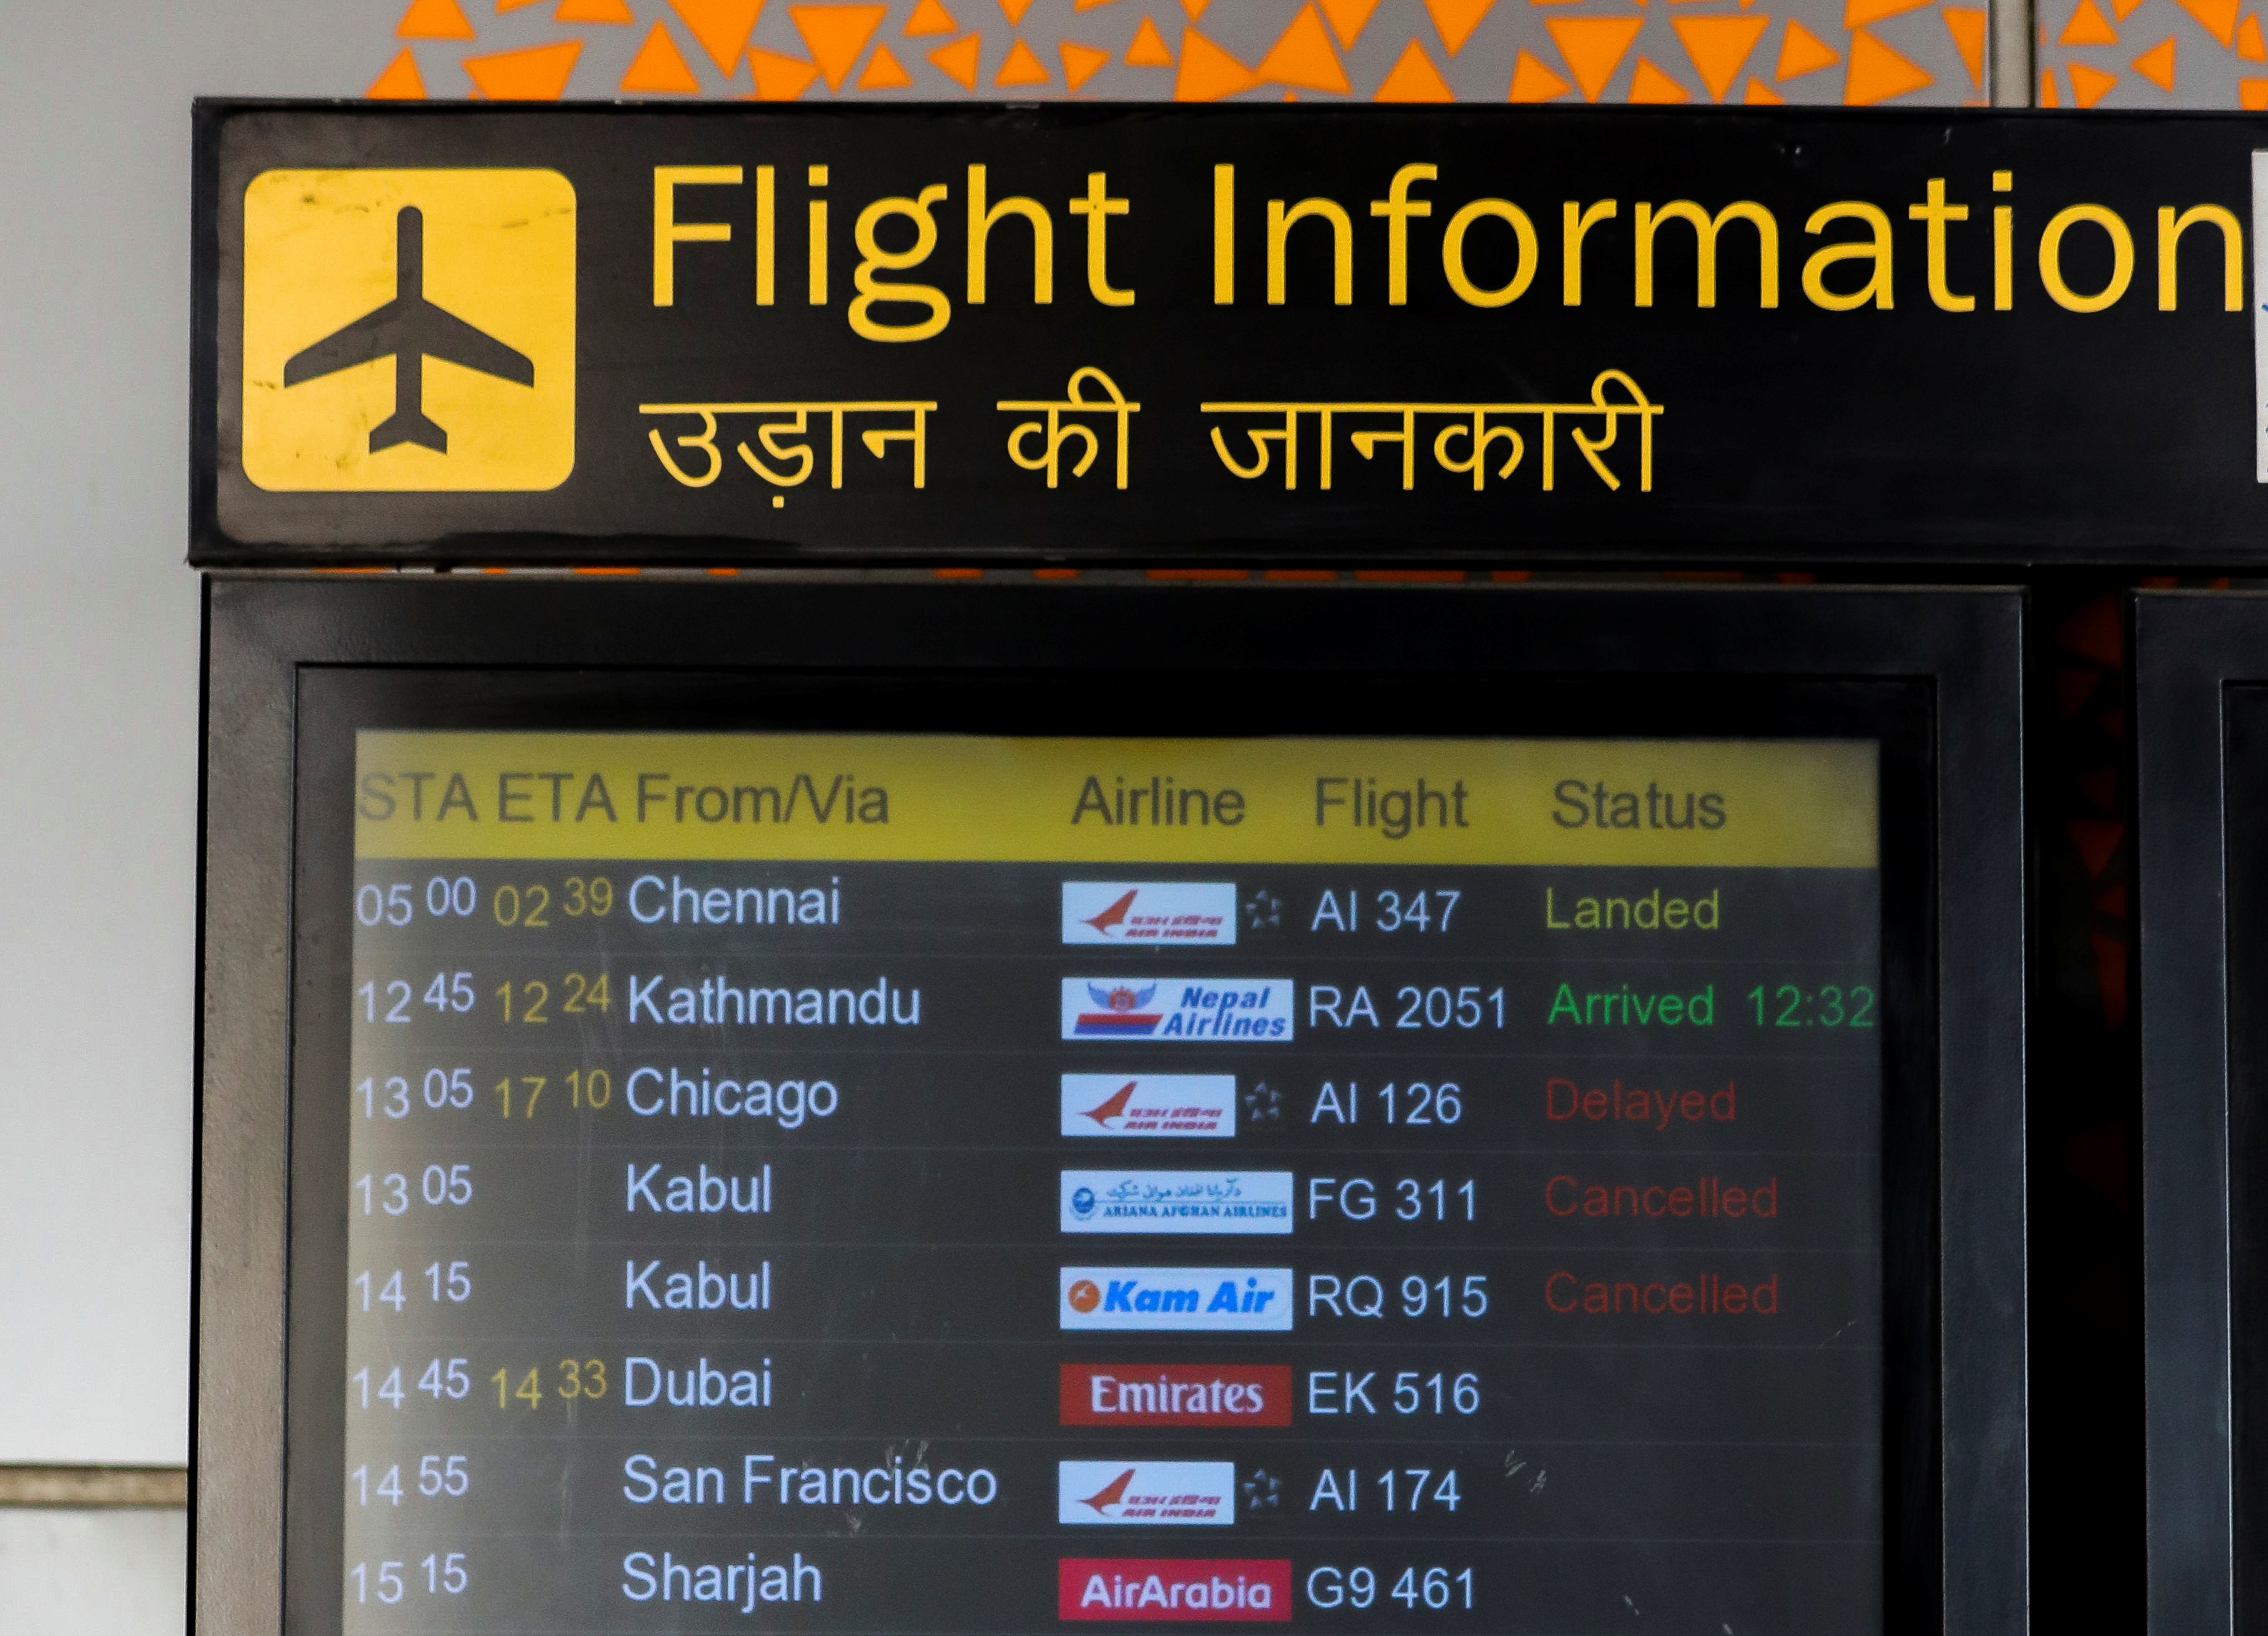 A flight Information board showing flights cancelled from Kabul is pictured at the Indira Gandhi International Airport in New Delhi